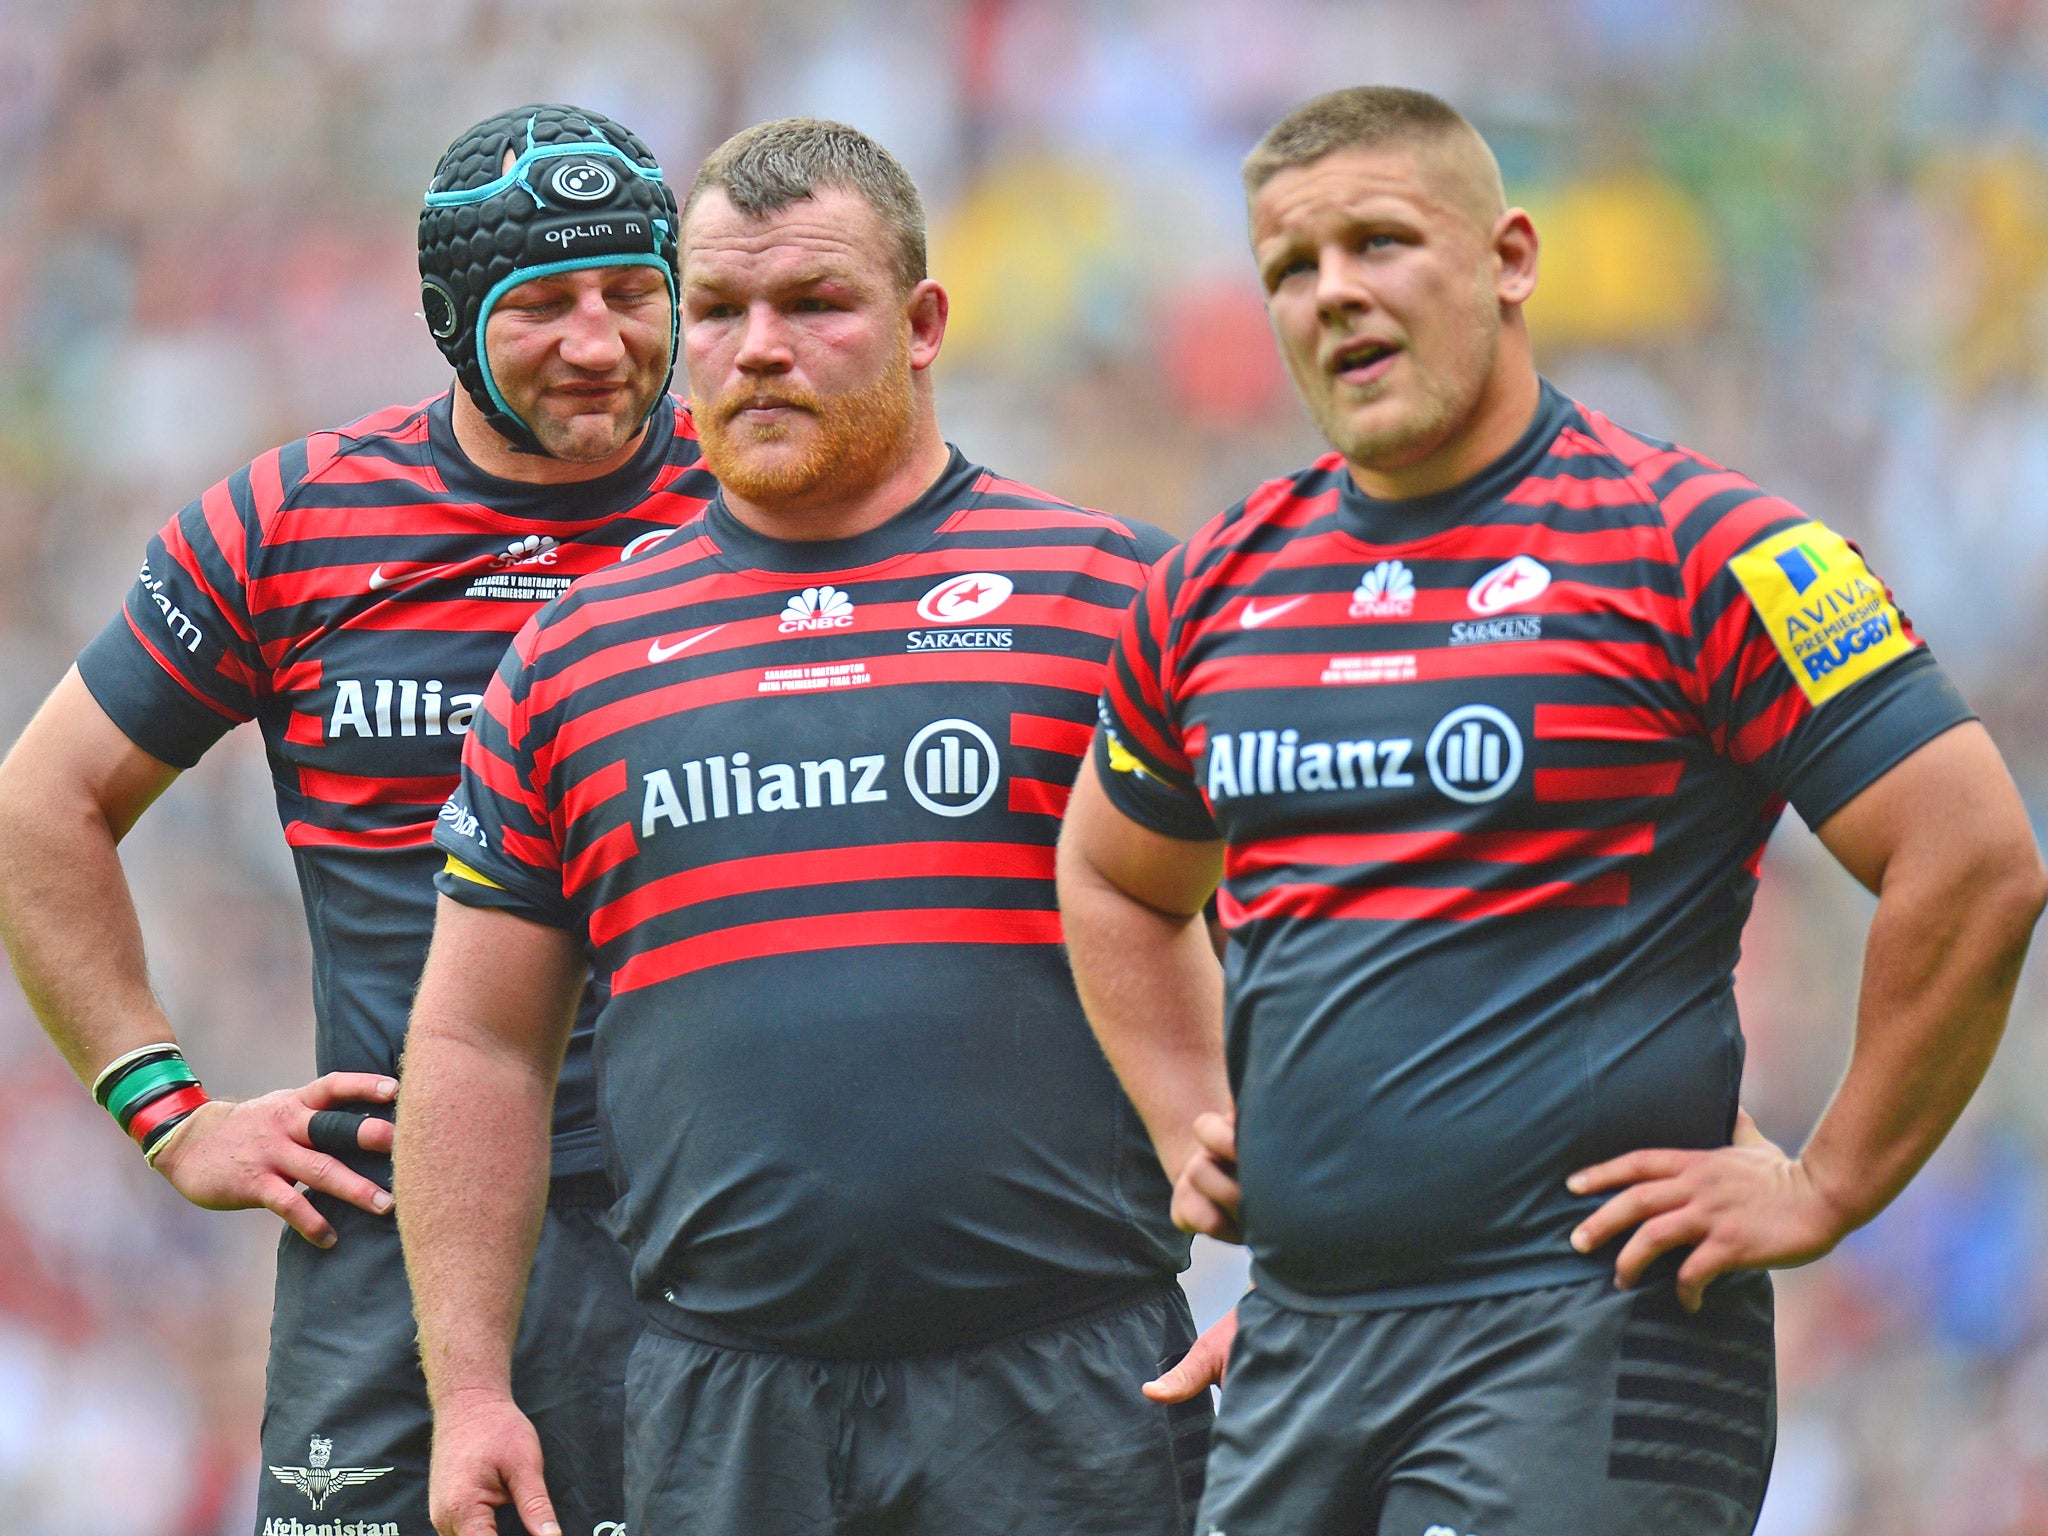 Dejected Saracens players following their recent Aviva Premiership title defeat